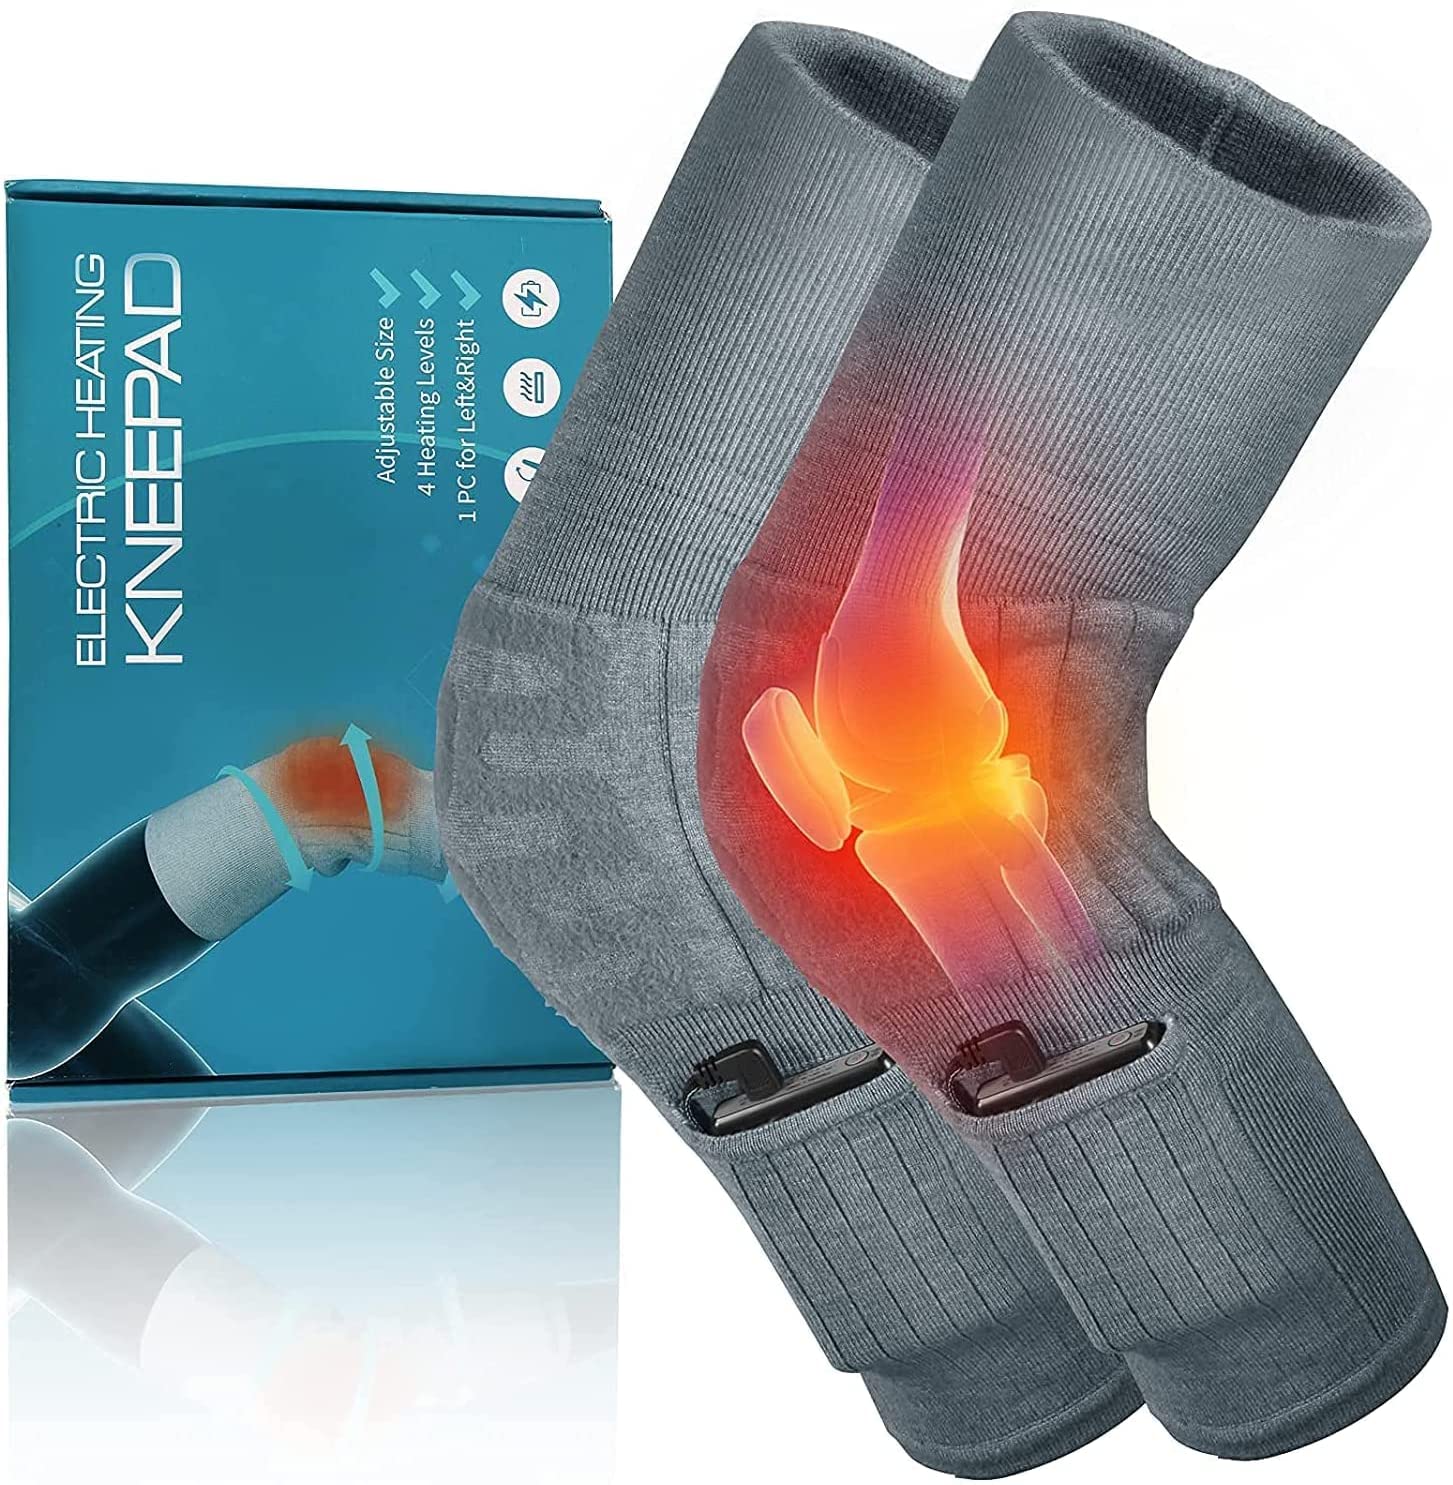 2-in-1 Arthritis Pain Relief Knee Brace, Heated Knee Support For Arthritis, Knee  Heating Pad For Hot Or Cold Therapy Keep Warm, Electric Heated Knee W